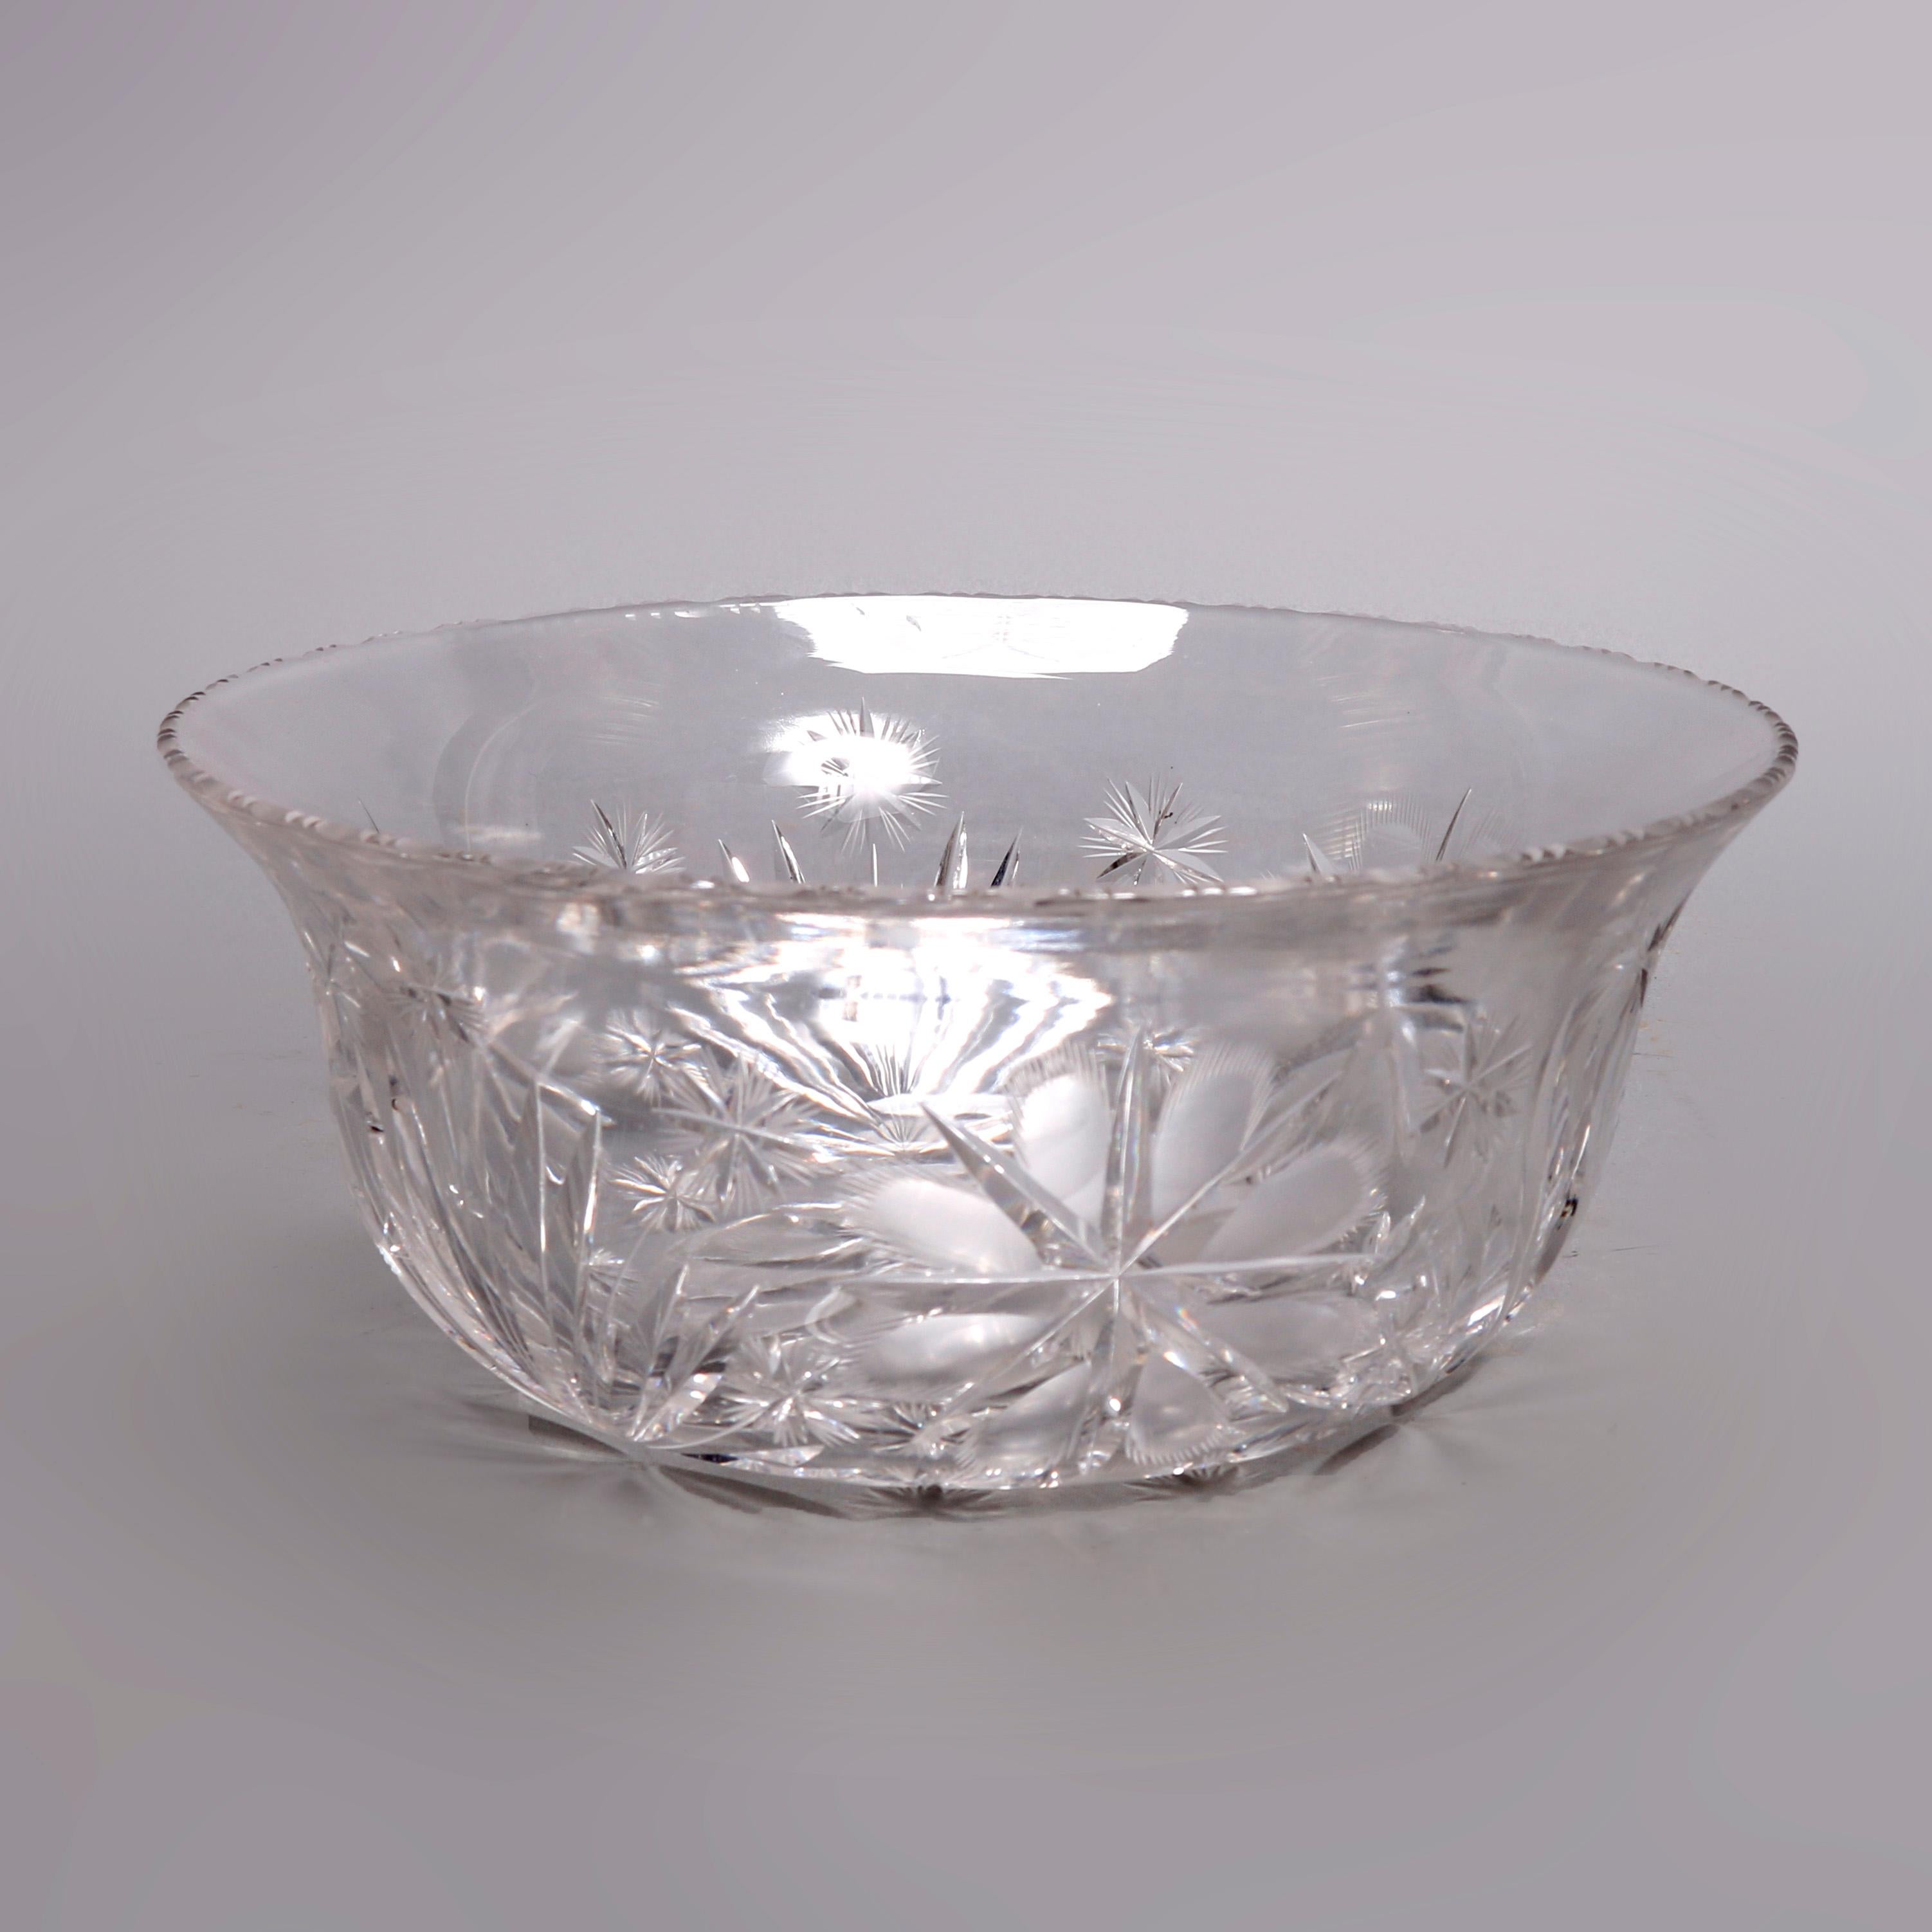 An antique brilliant cut glass serving bowl offers flared form with floral and foliate cut decoration and star base, 20th century

Measures: 4.5